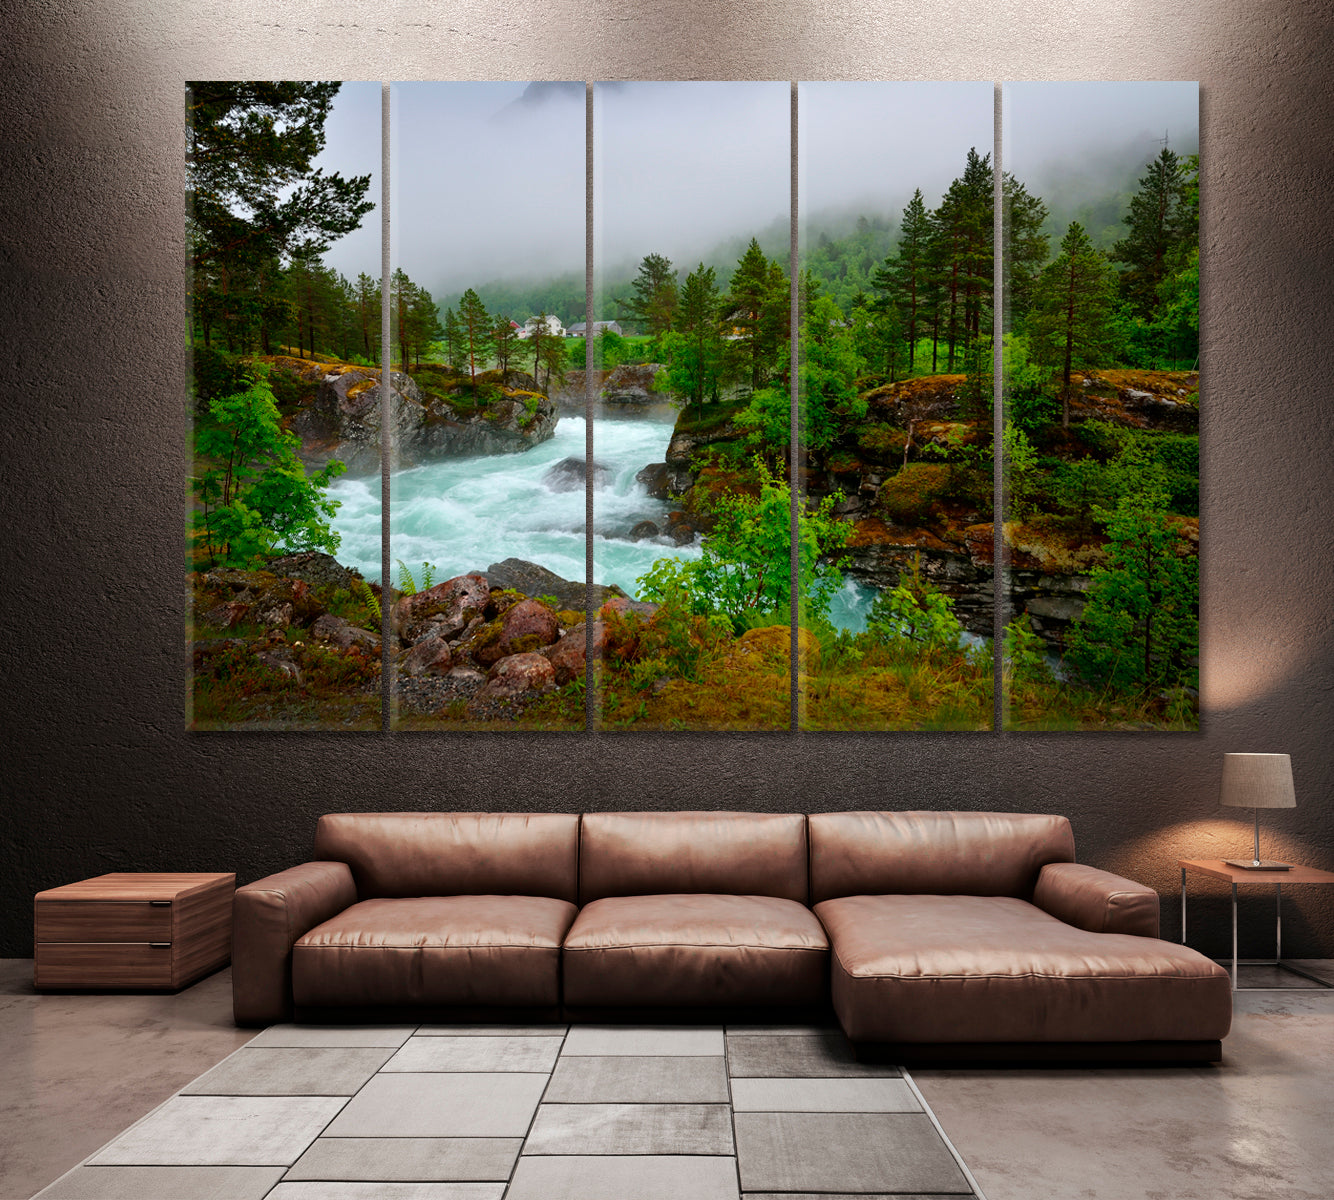 Mountain Landscape Canvas Print ArtLexy 5 Panels 36"x24" inches 